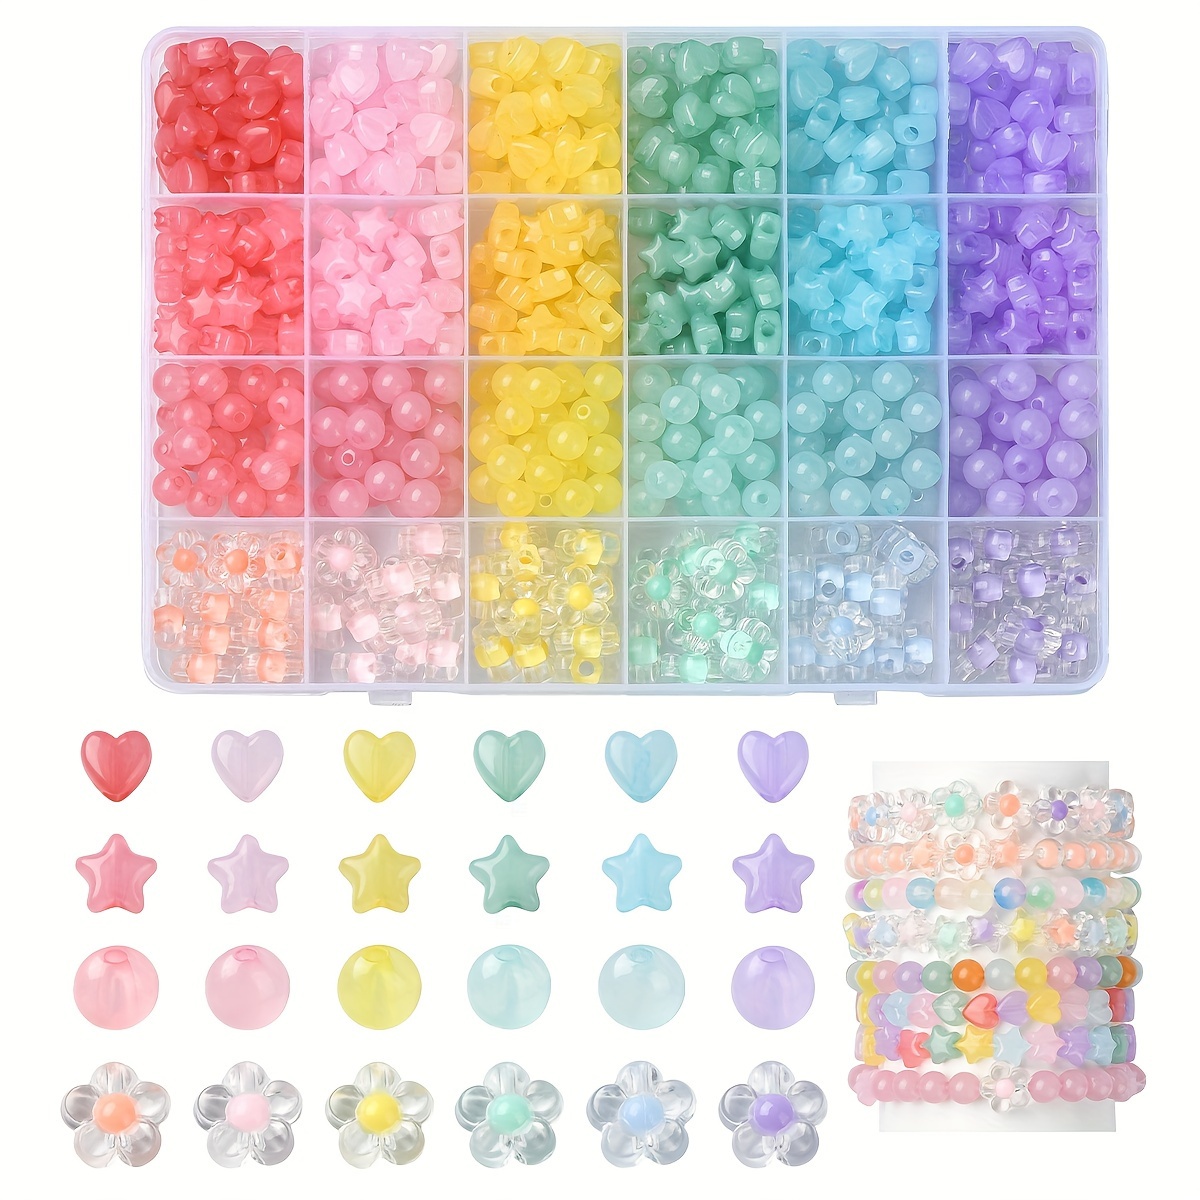 

About 702pcs Round/heart/star/daisy Mixed Style Acrylic Imitation Jelly Beads For Jewelry Making Diy Fashion Bracelet Necklace Beaded Decors Accessories